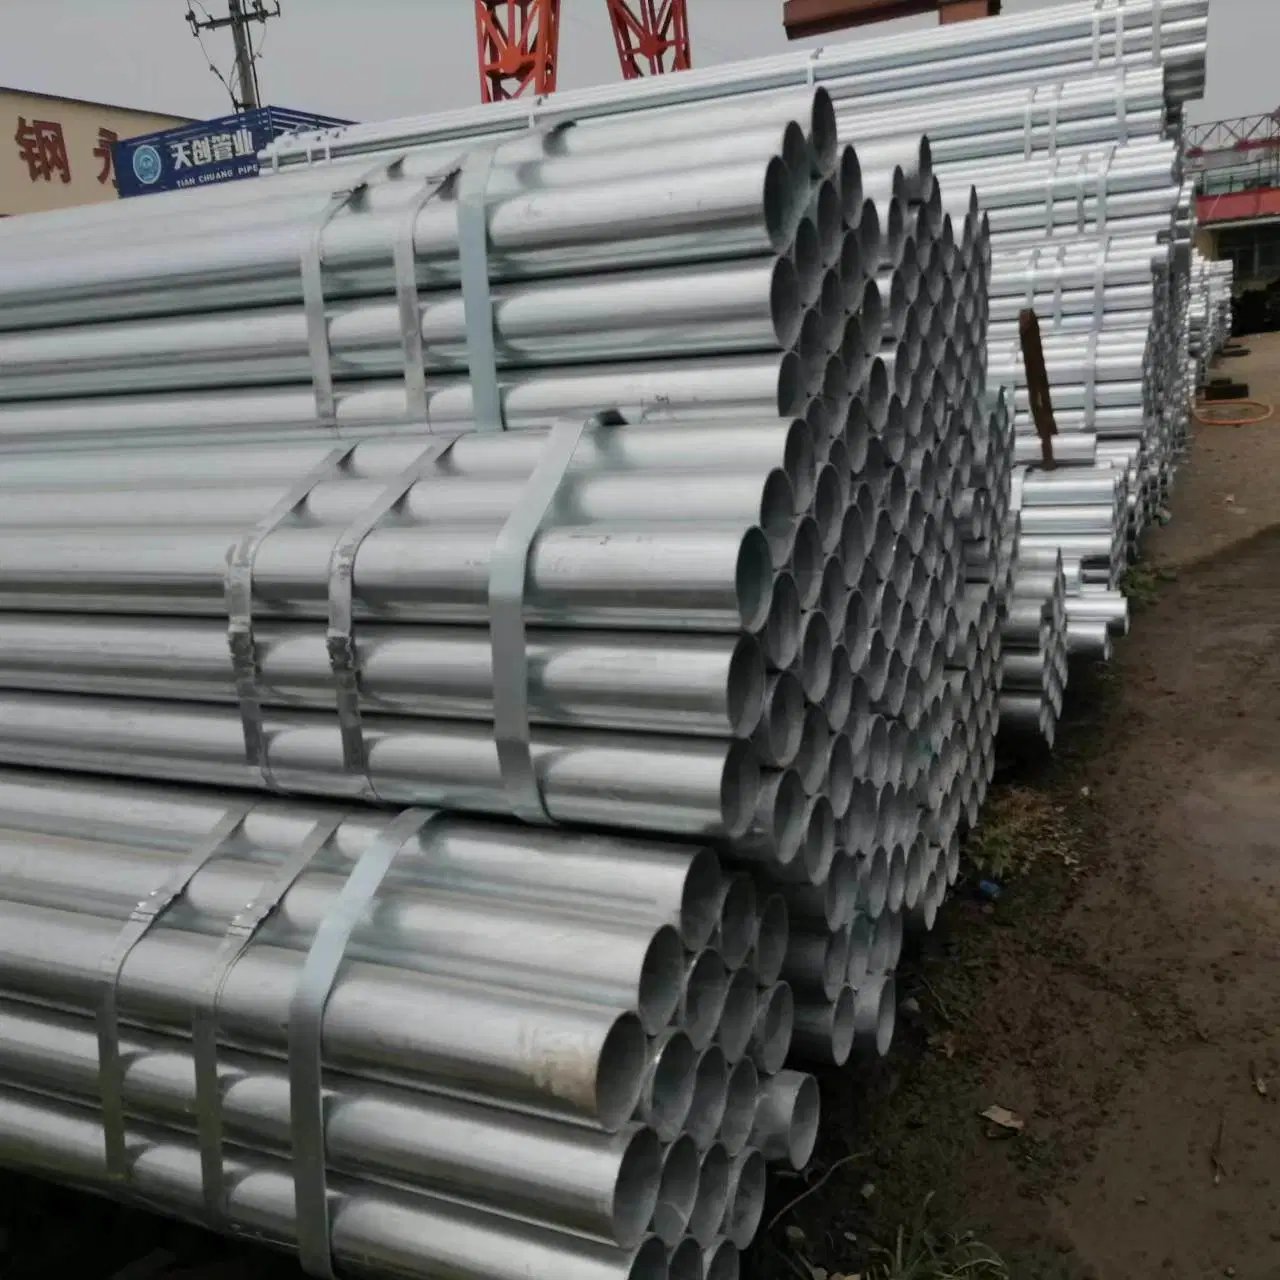 2023 Factory Sells ASTM A312/A213 TP304/304L/316/316L Seamless/Welded Cold/Hot Rolled Seamless Stainless Steel Pipe Ss Pipe Manufacturer Galvanized Steel Pi